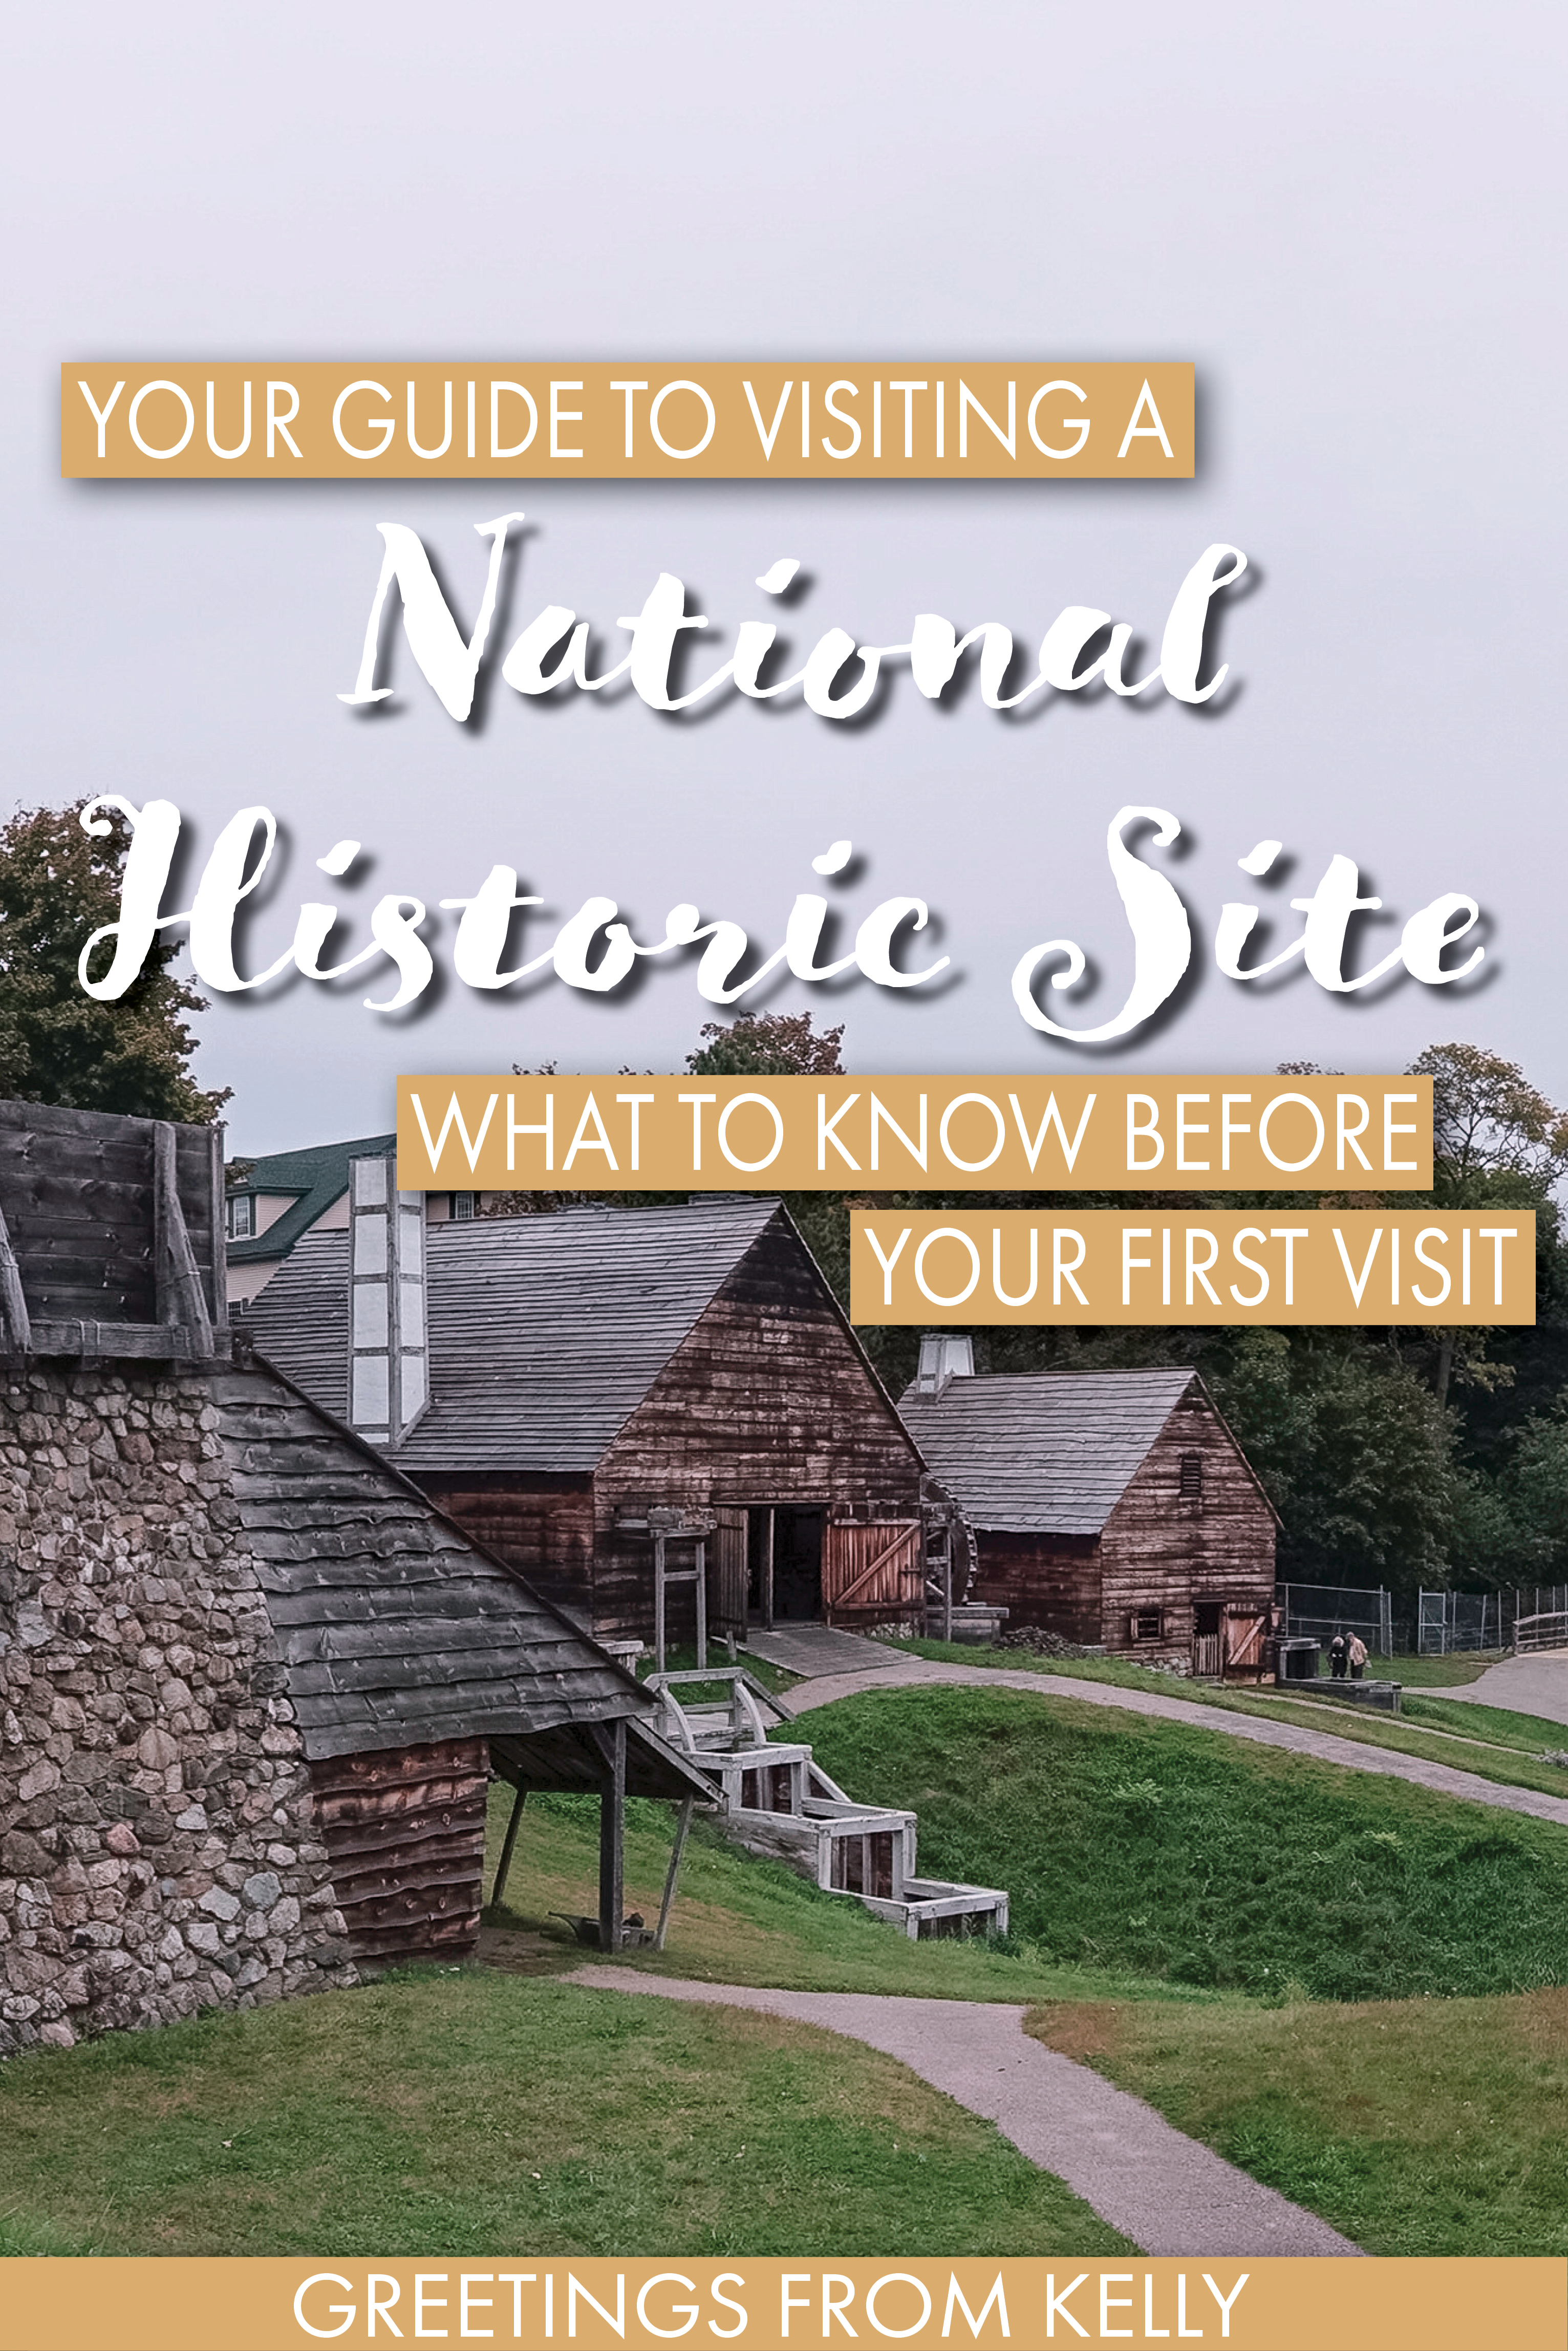 Your Guide to Visiting a National Historic Site Pin for Pinterest Board